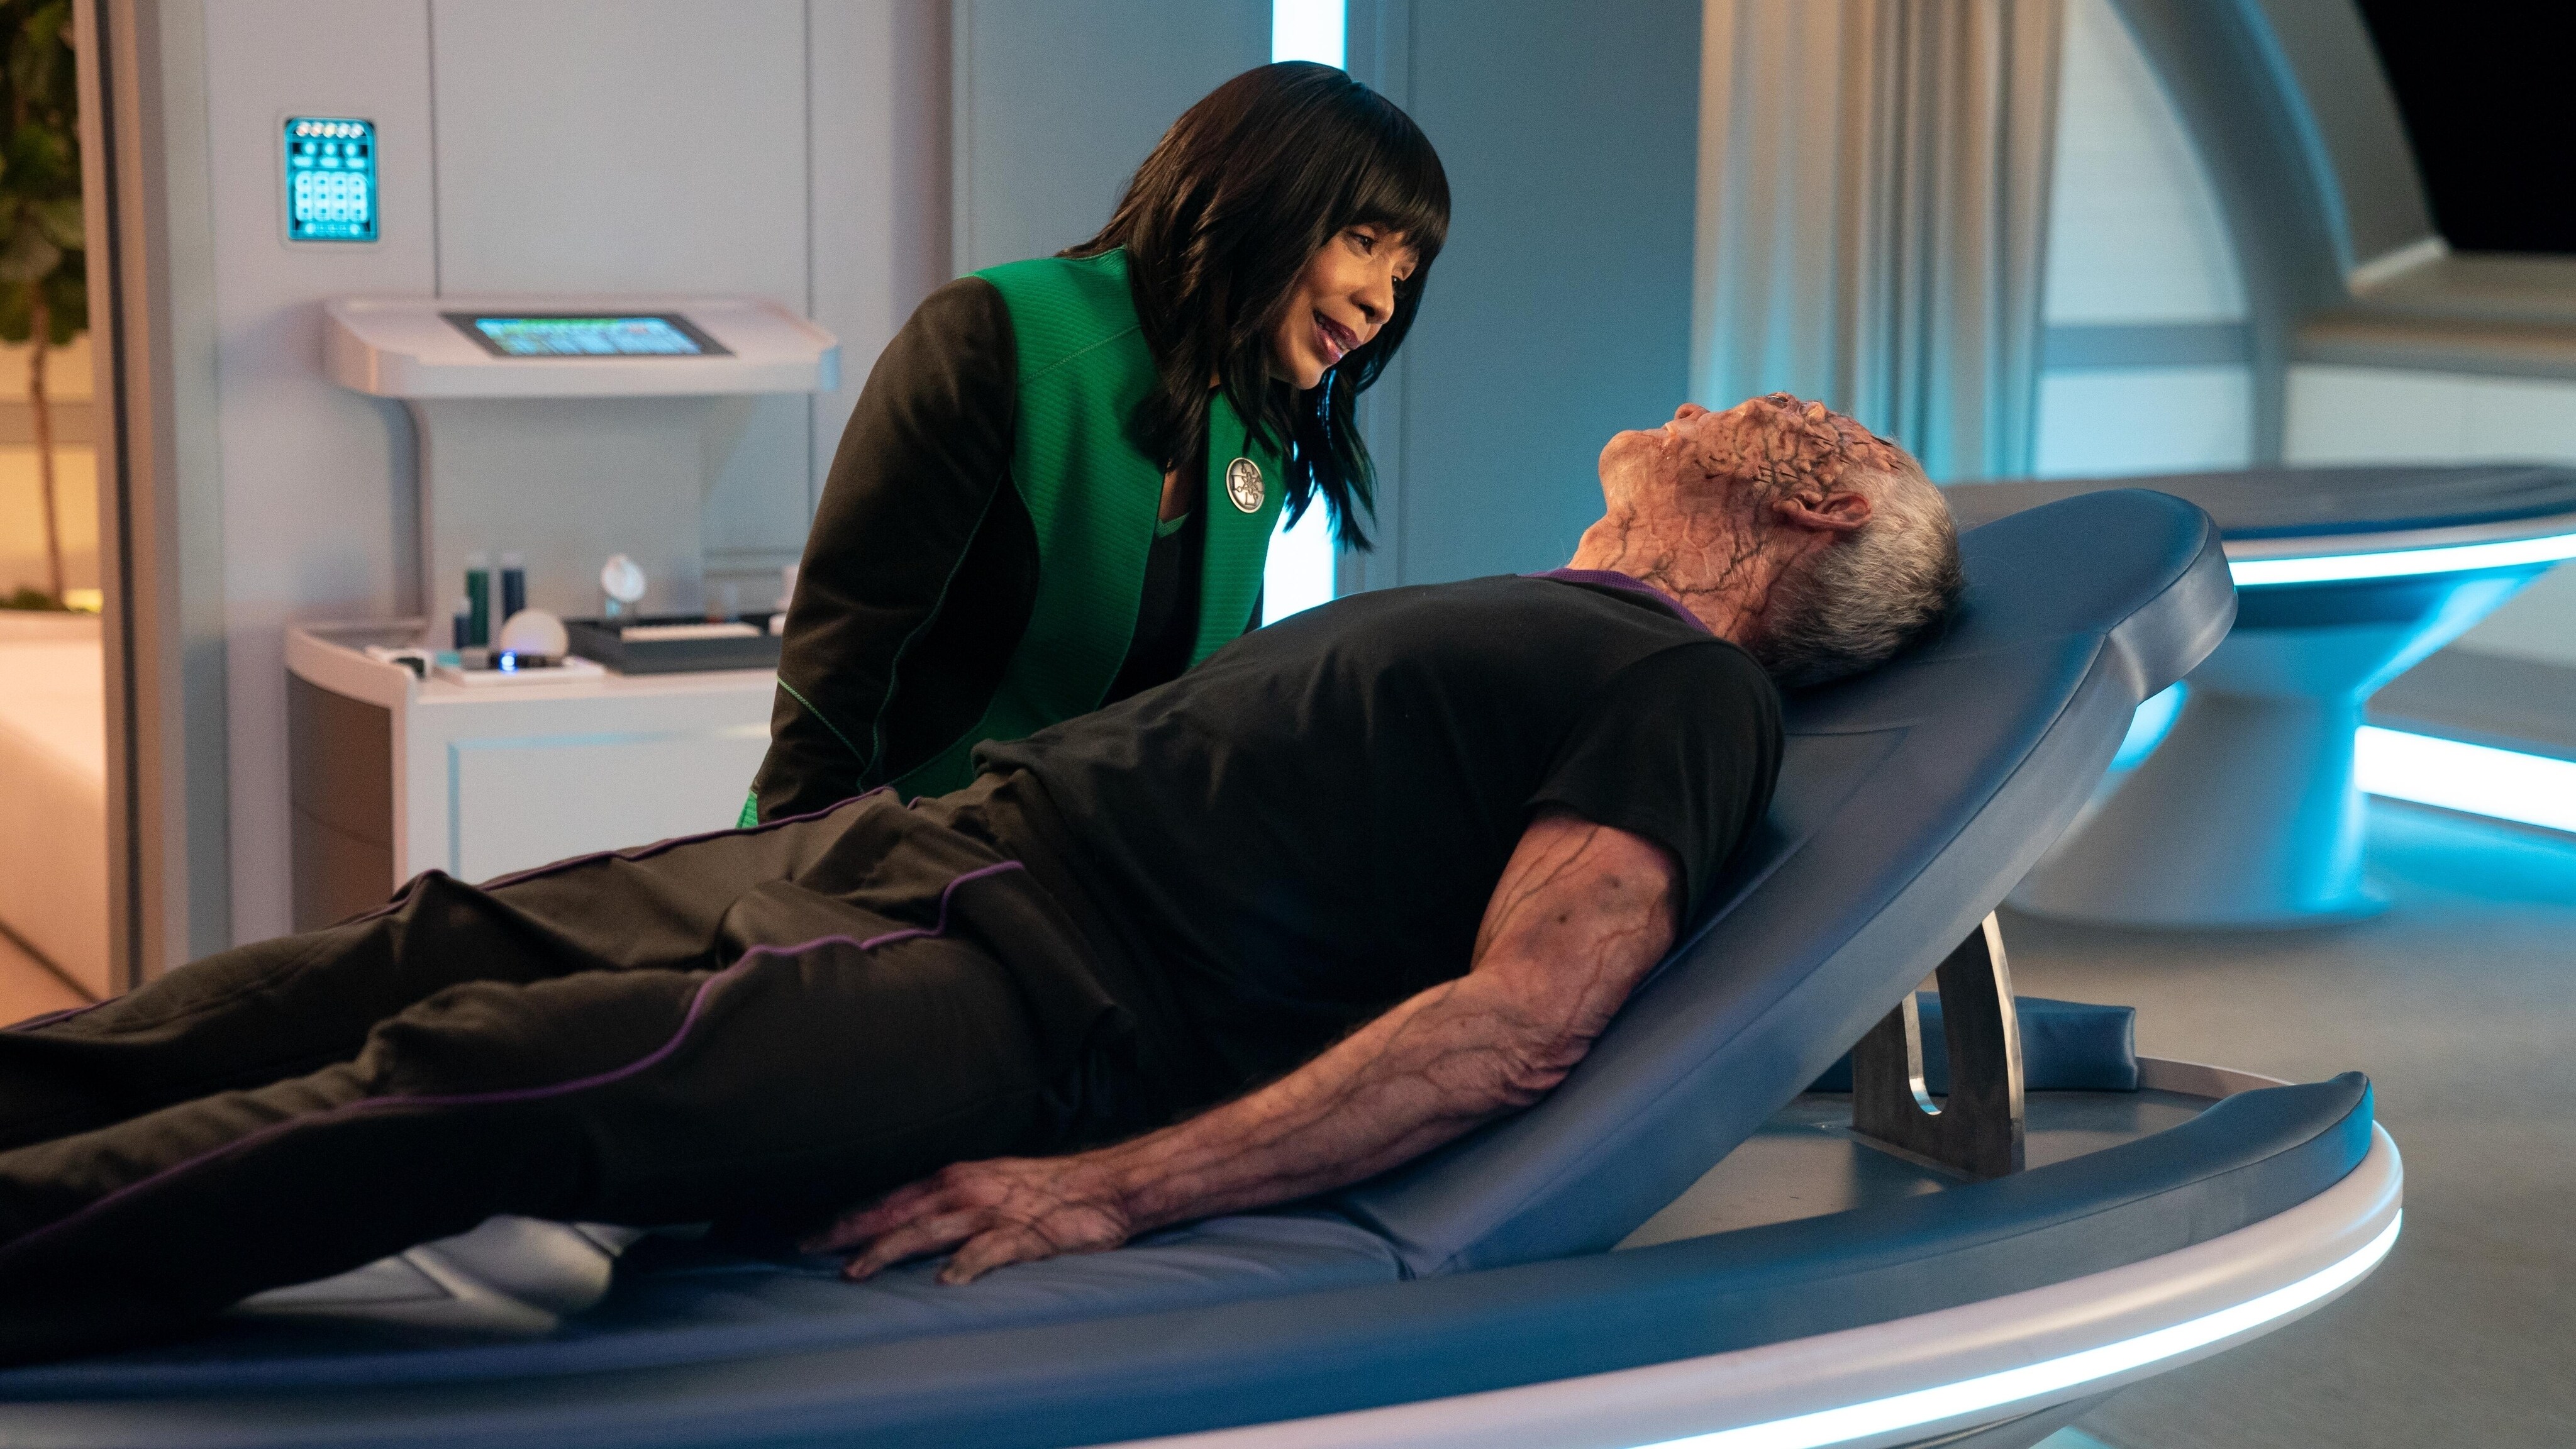 The Orville: New Horizons -- “Shadow Realms” - Episode 302 -- The Orville crew embarks on a mission to explore a dangerous region of Krill space. Dr. Claire Finn (Penny Johnson Jerald) and Admiral Christie (James Read), shown. (Photo by: Michael Desmond/Hulu)